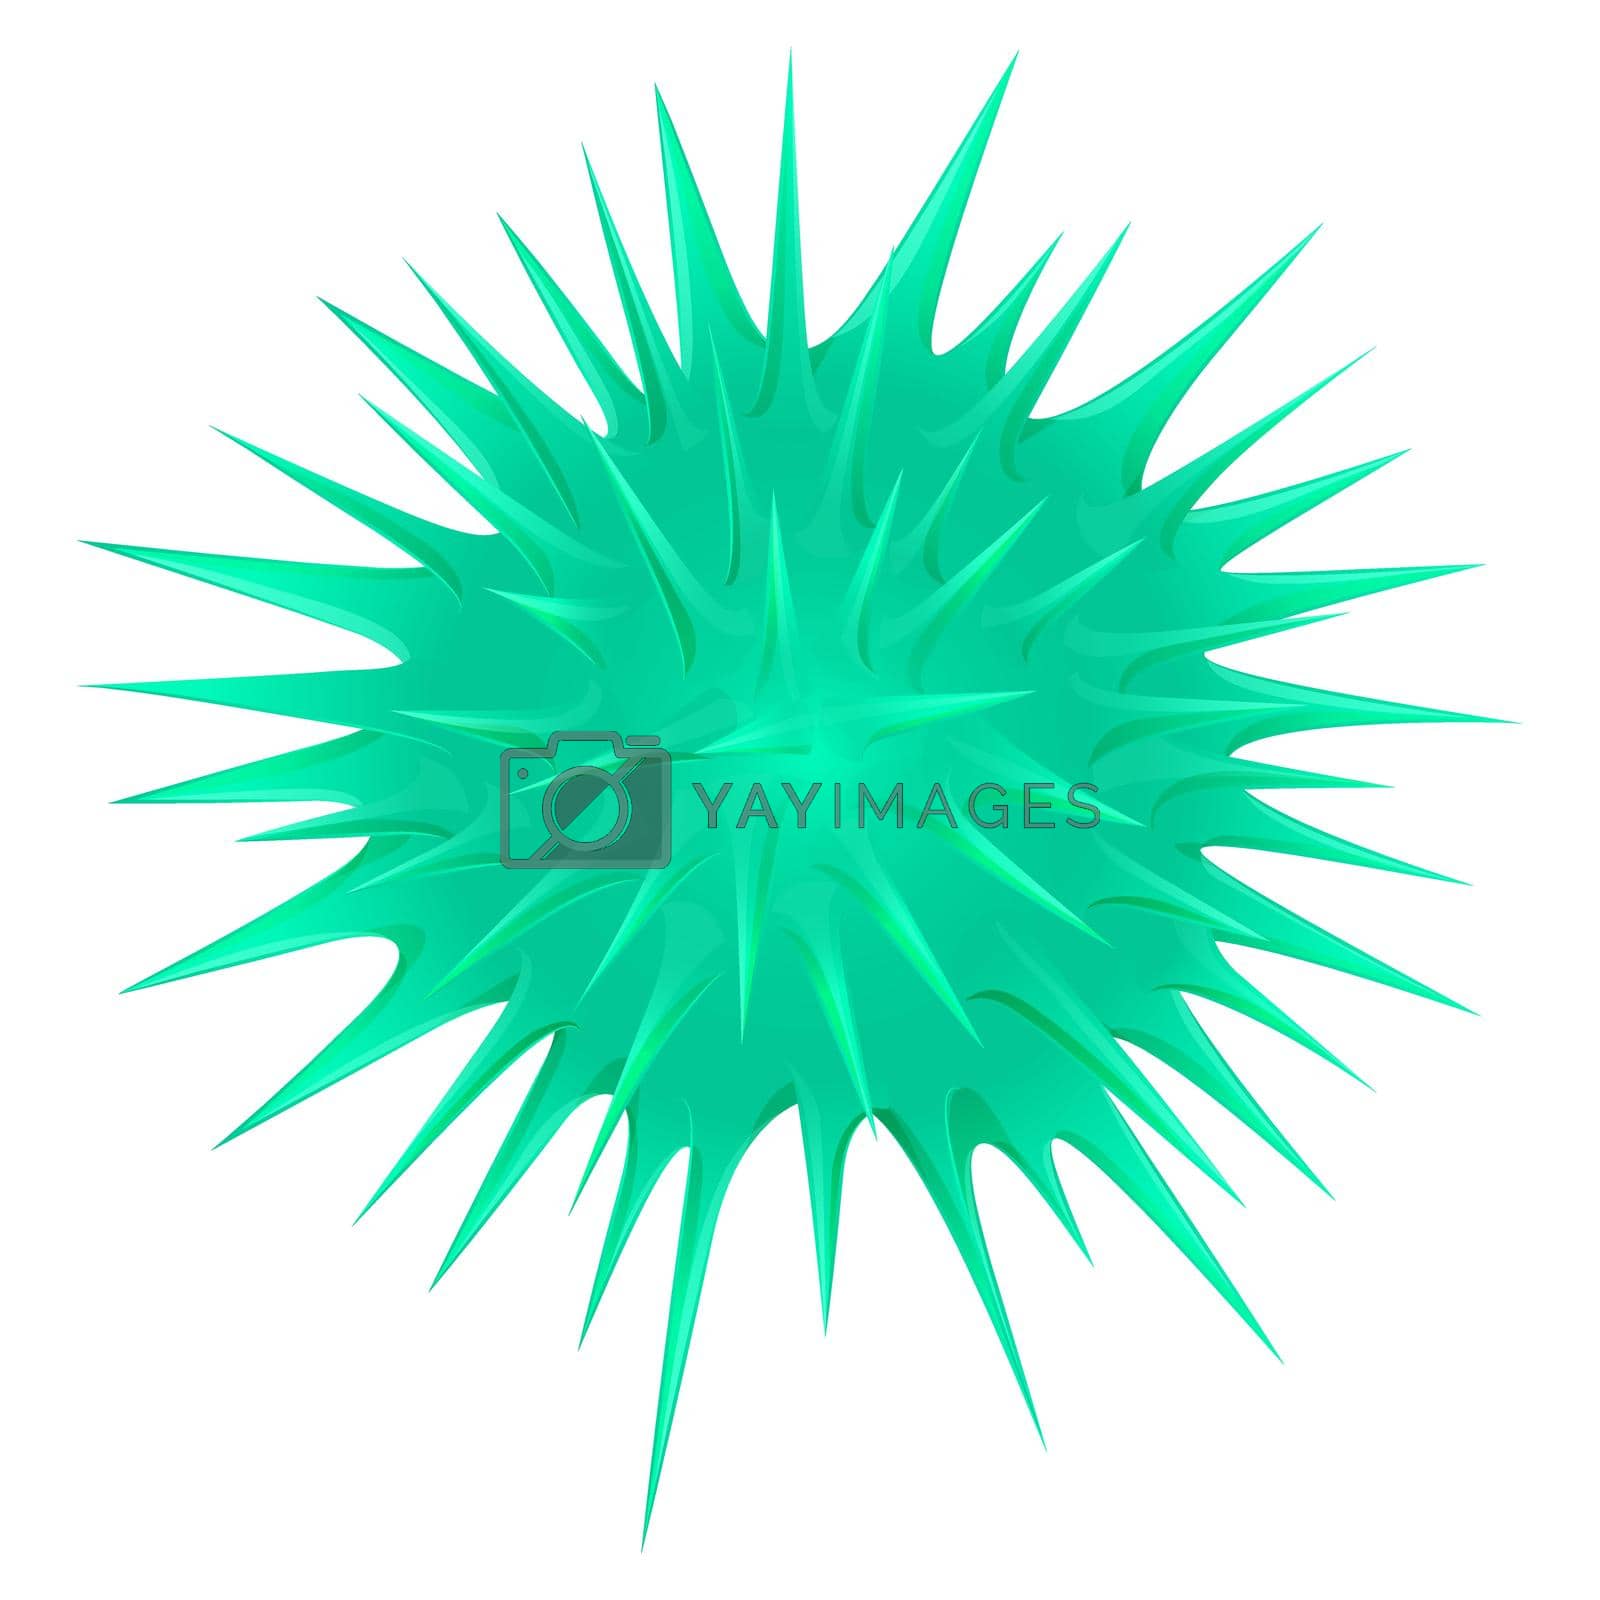 Royalty free image of Green thorny ball on white by iimages